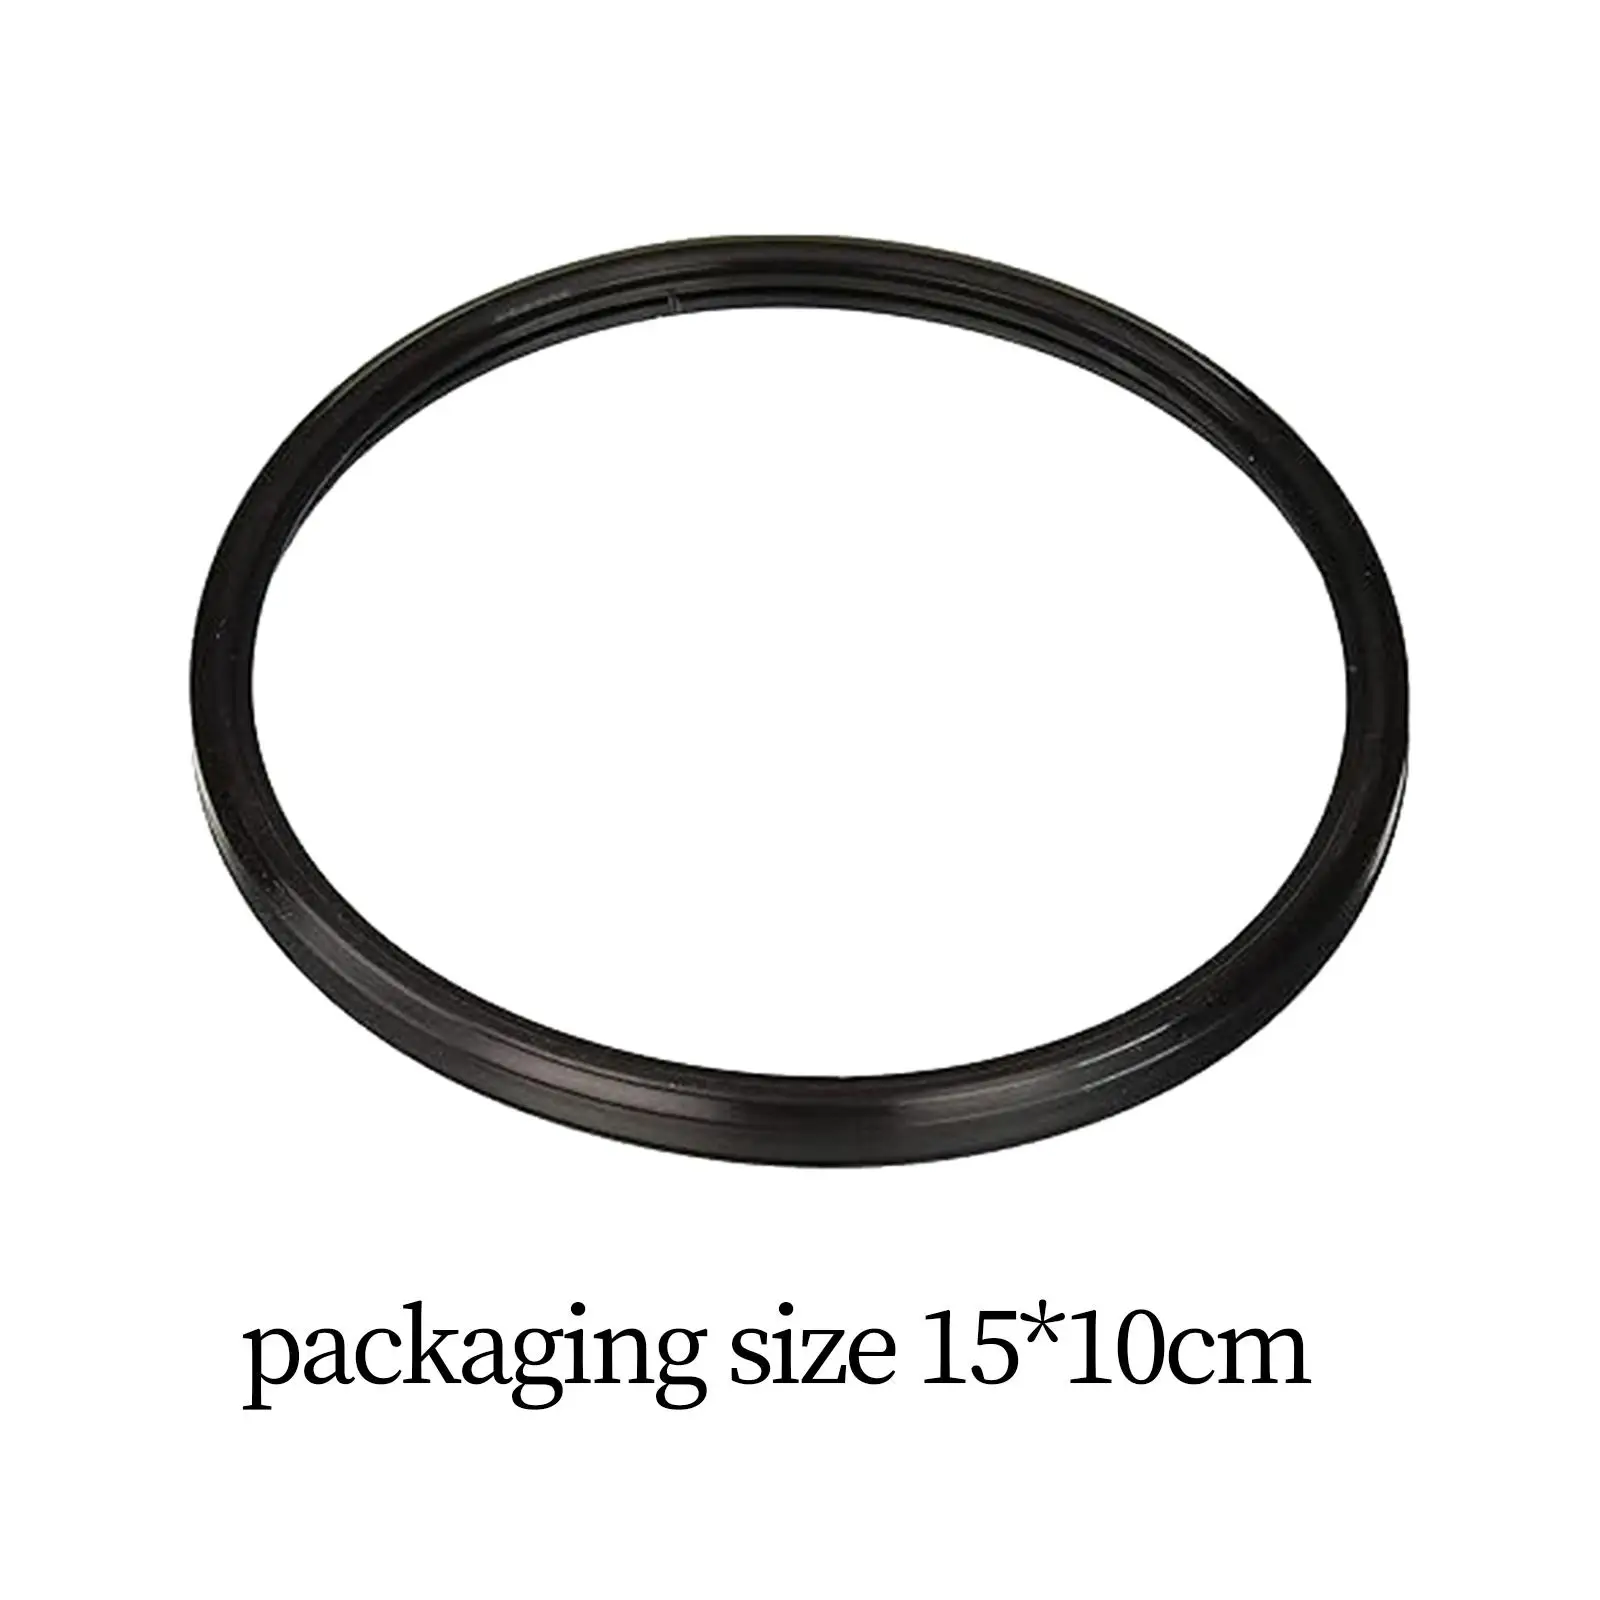 Lens Gasket Black Underwater Lights Accessory Rubber Washer for Spx0540Z2 Spx0580Z2 Repair Parts Sturdy Pools Parts Supplies